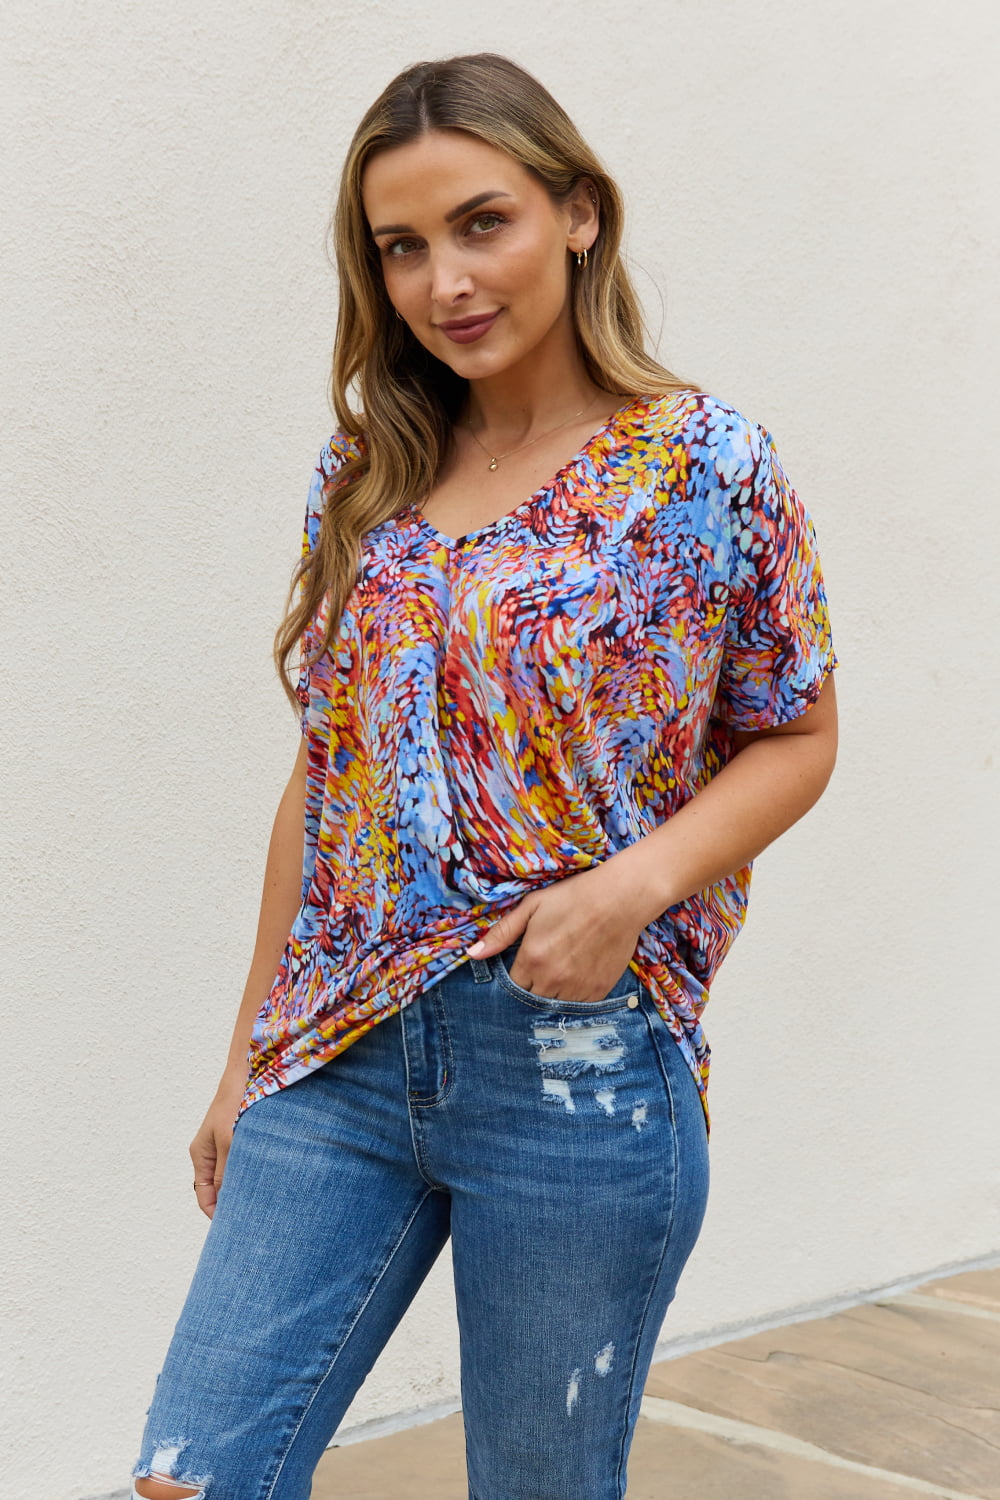 Be Stage Full Size Printed Dolman Flowy Top - Online Only